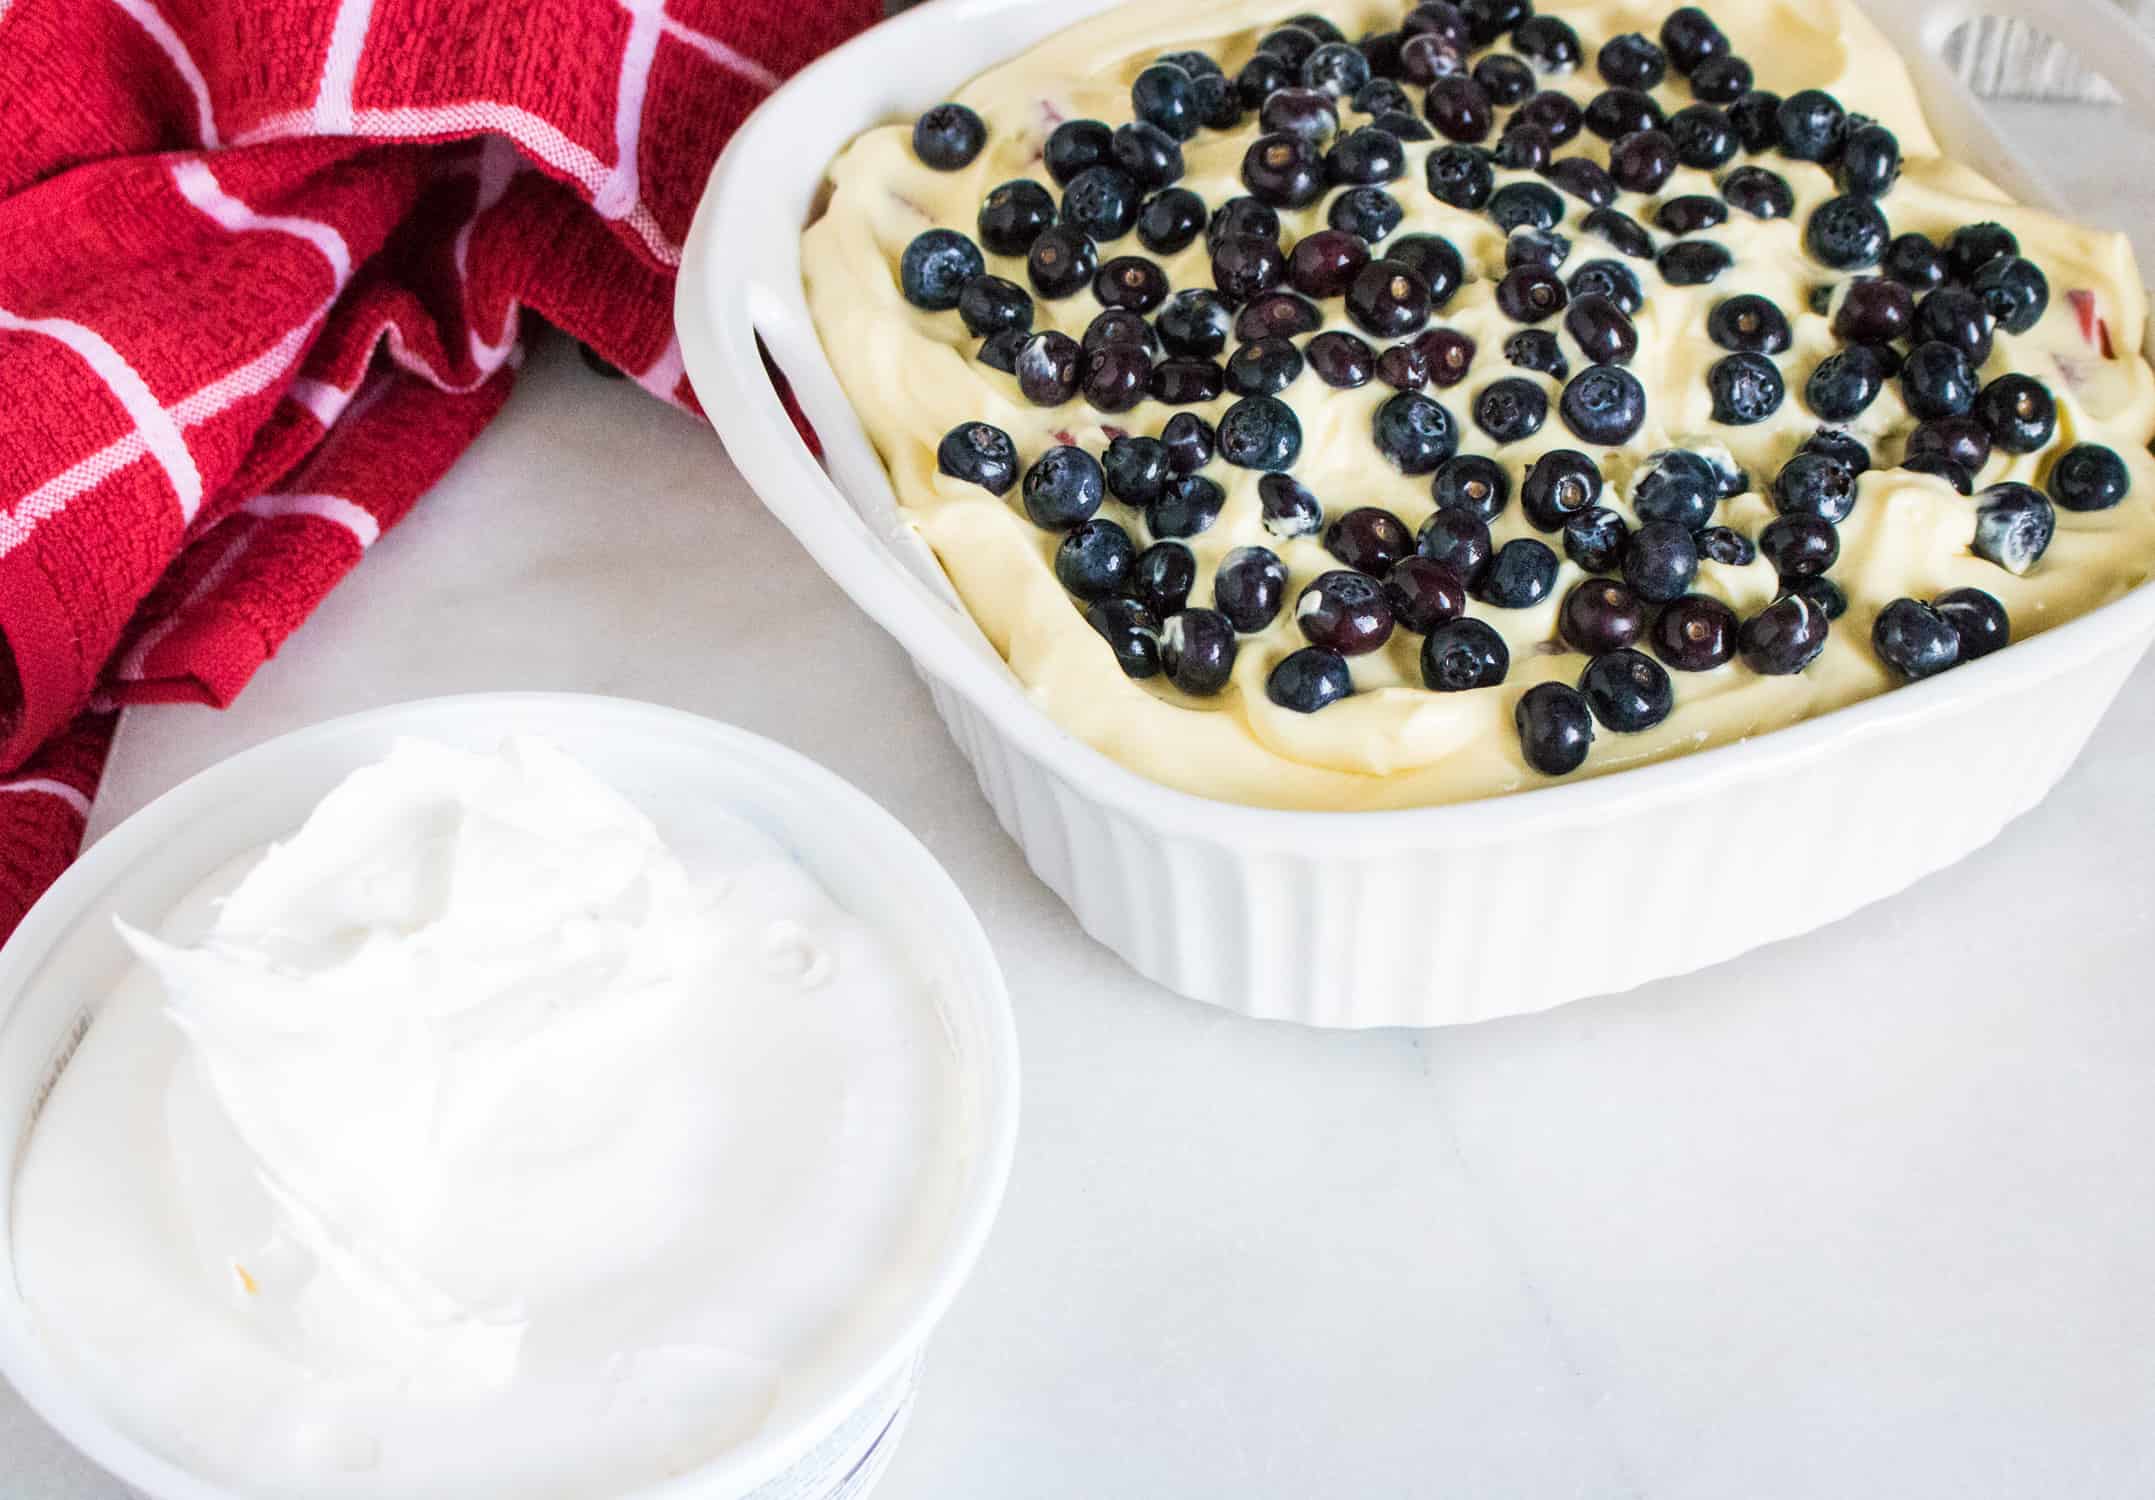 Layer of pudding and blueberries added with whipped topping on the side